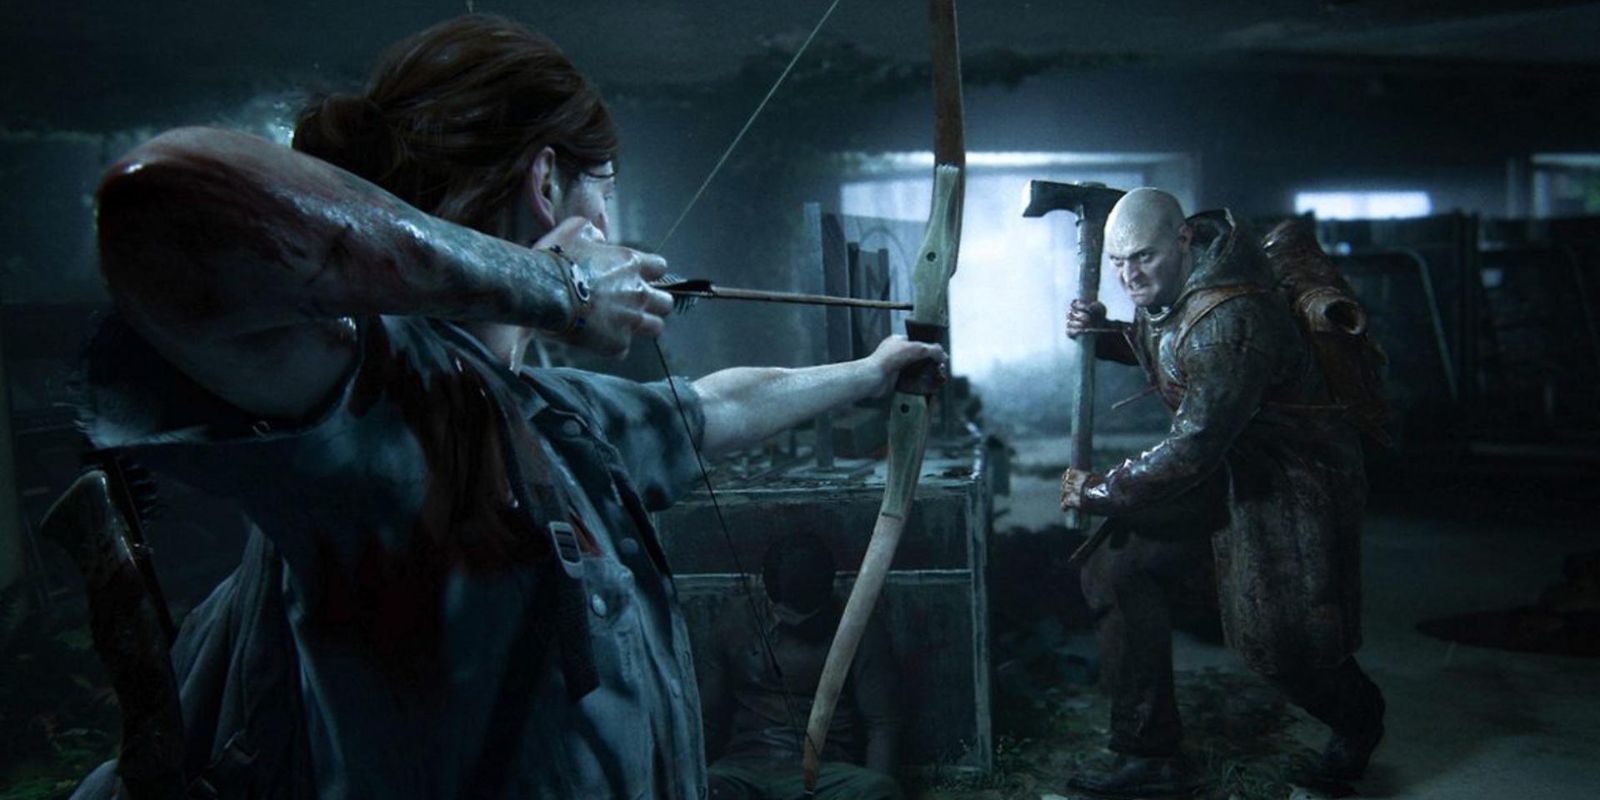 Where to Find A Bow & Arrow in The Last of Us 2